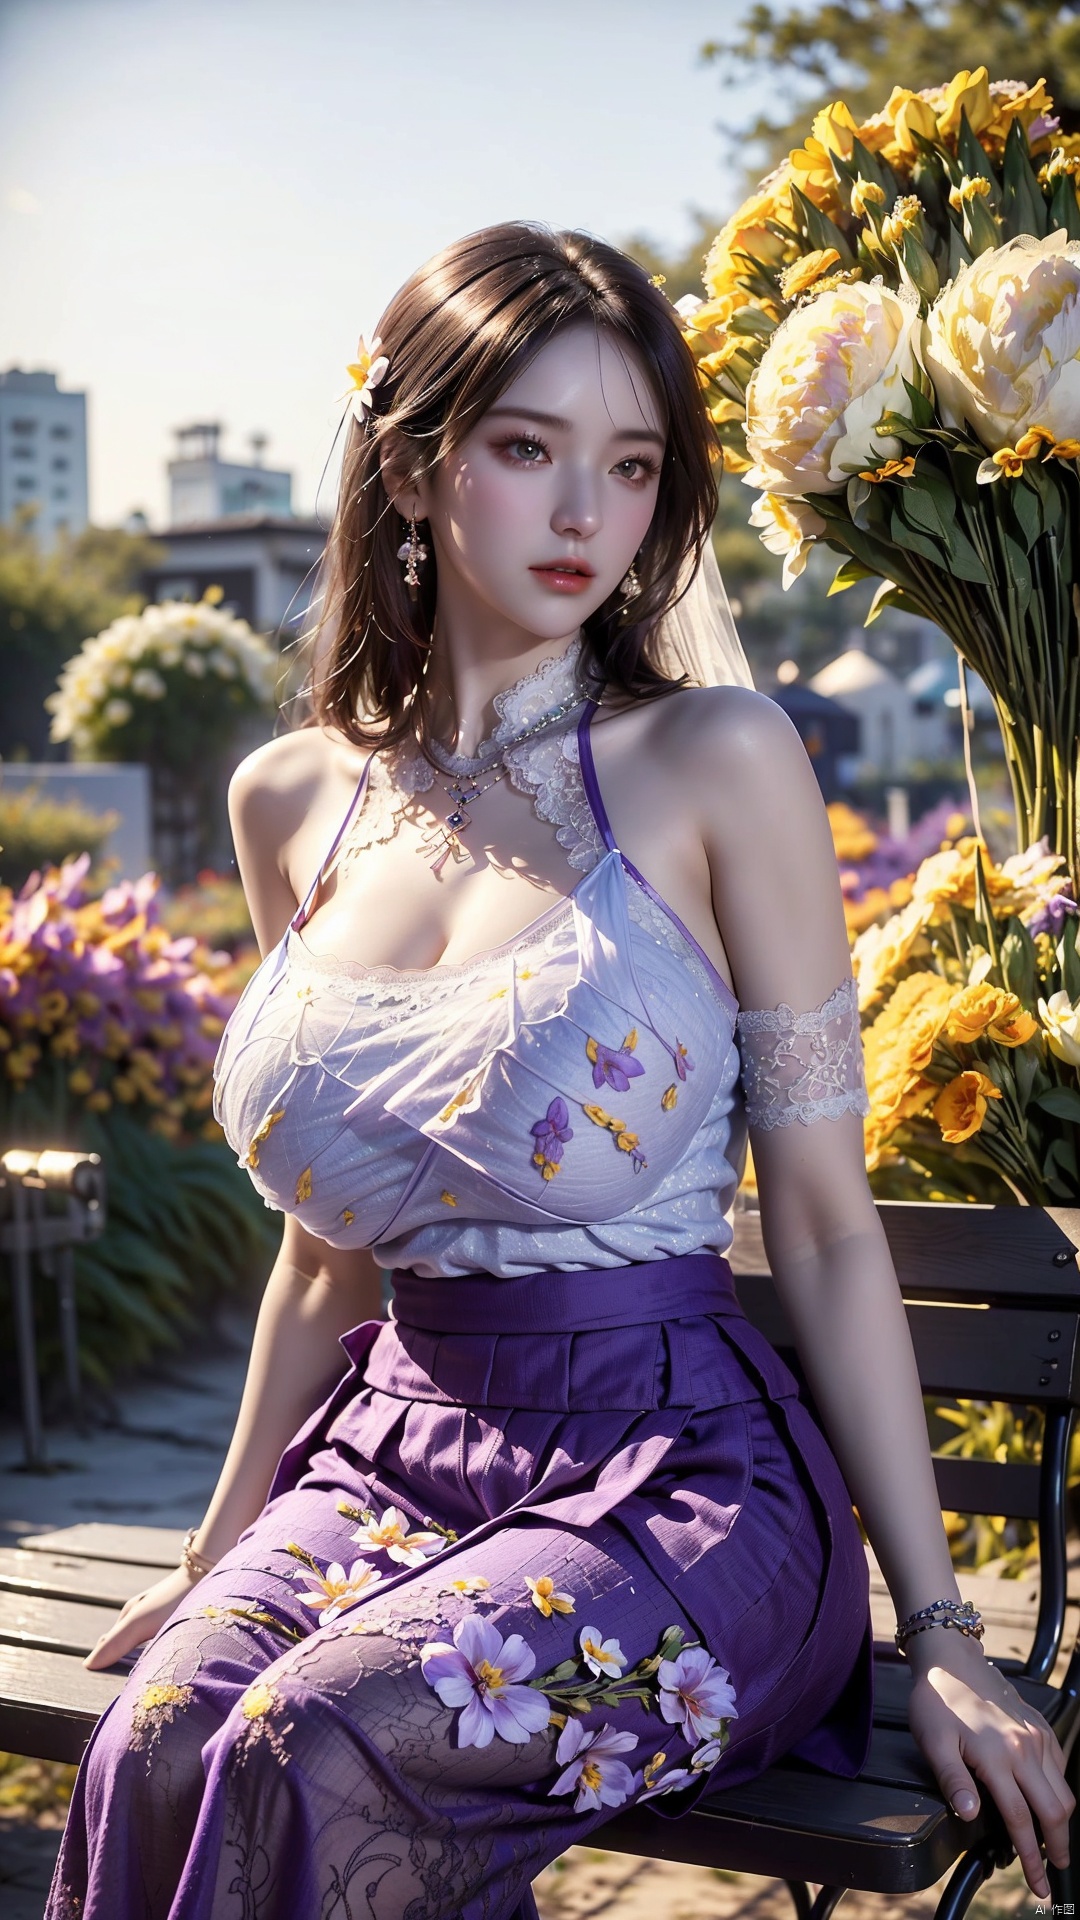  (Floral_wrap_top:1.4),(purple Midi_skirt:1.4),(Beaded_bracelets:1.3),(Garden_party_background:1.5)1girl,solo,long hair, (big breasts:1.76),outdoors,streets,street,city,(Beach_background:1.4),(masterpiece, best quality, realistic,),(photorealistic:1.4),chinese girl,lip,brown eyes,(brighteninglight:1.2),(Increasequality:1.4),finelydetailedeyes,She has exquisite facial features and delicate skin,Rich and realistic skin texture,fine hands,the magnificent evening dress was adorned with sparkling jewelry,(Facing the camera, sitting on a park bench:1.3),(Romantic_lace_top:1.5),(Flowy_maxi_skirt:1.4),(Delicate_bracelet:1.3),(high neck lace evening dress:1.39),(Garden_wedding_background:1.39), yuyao, qianjin, (big breasts:1.89),(flowers:1.69), shidudou